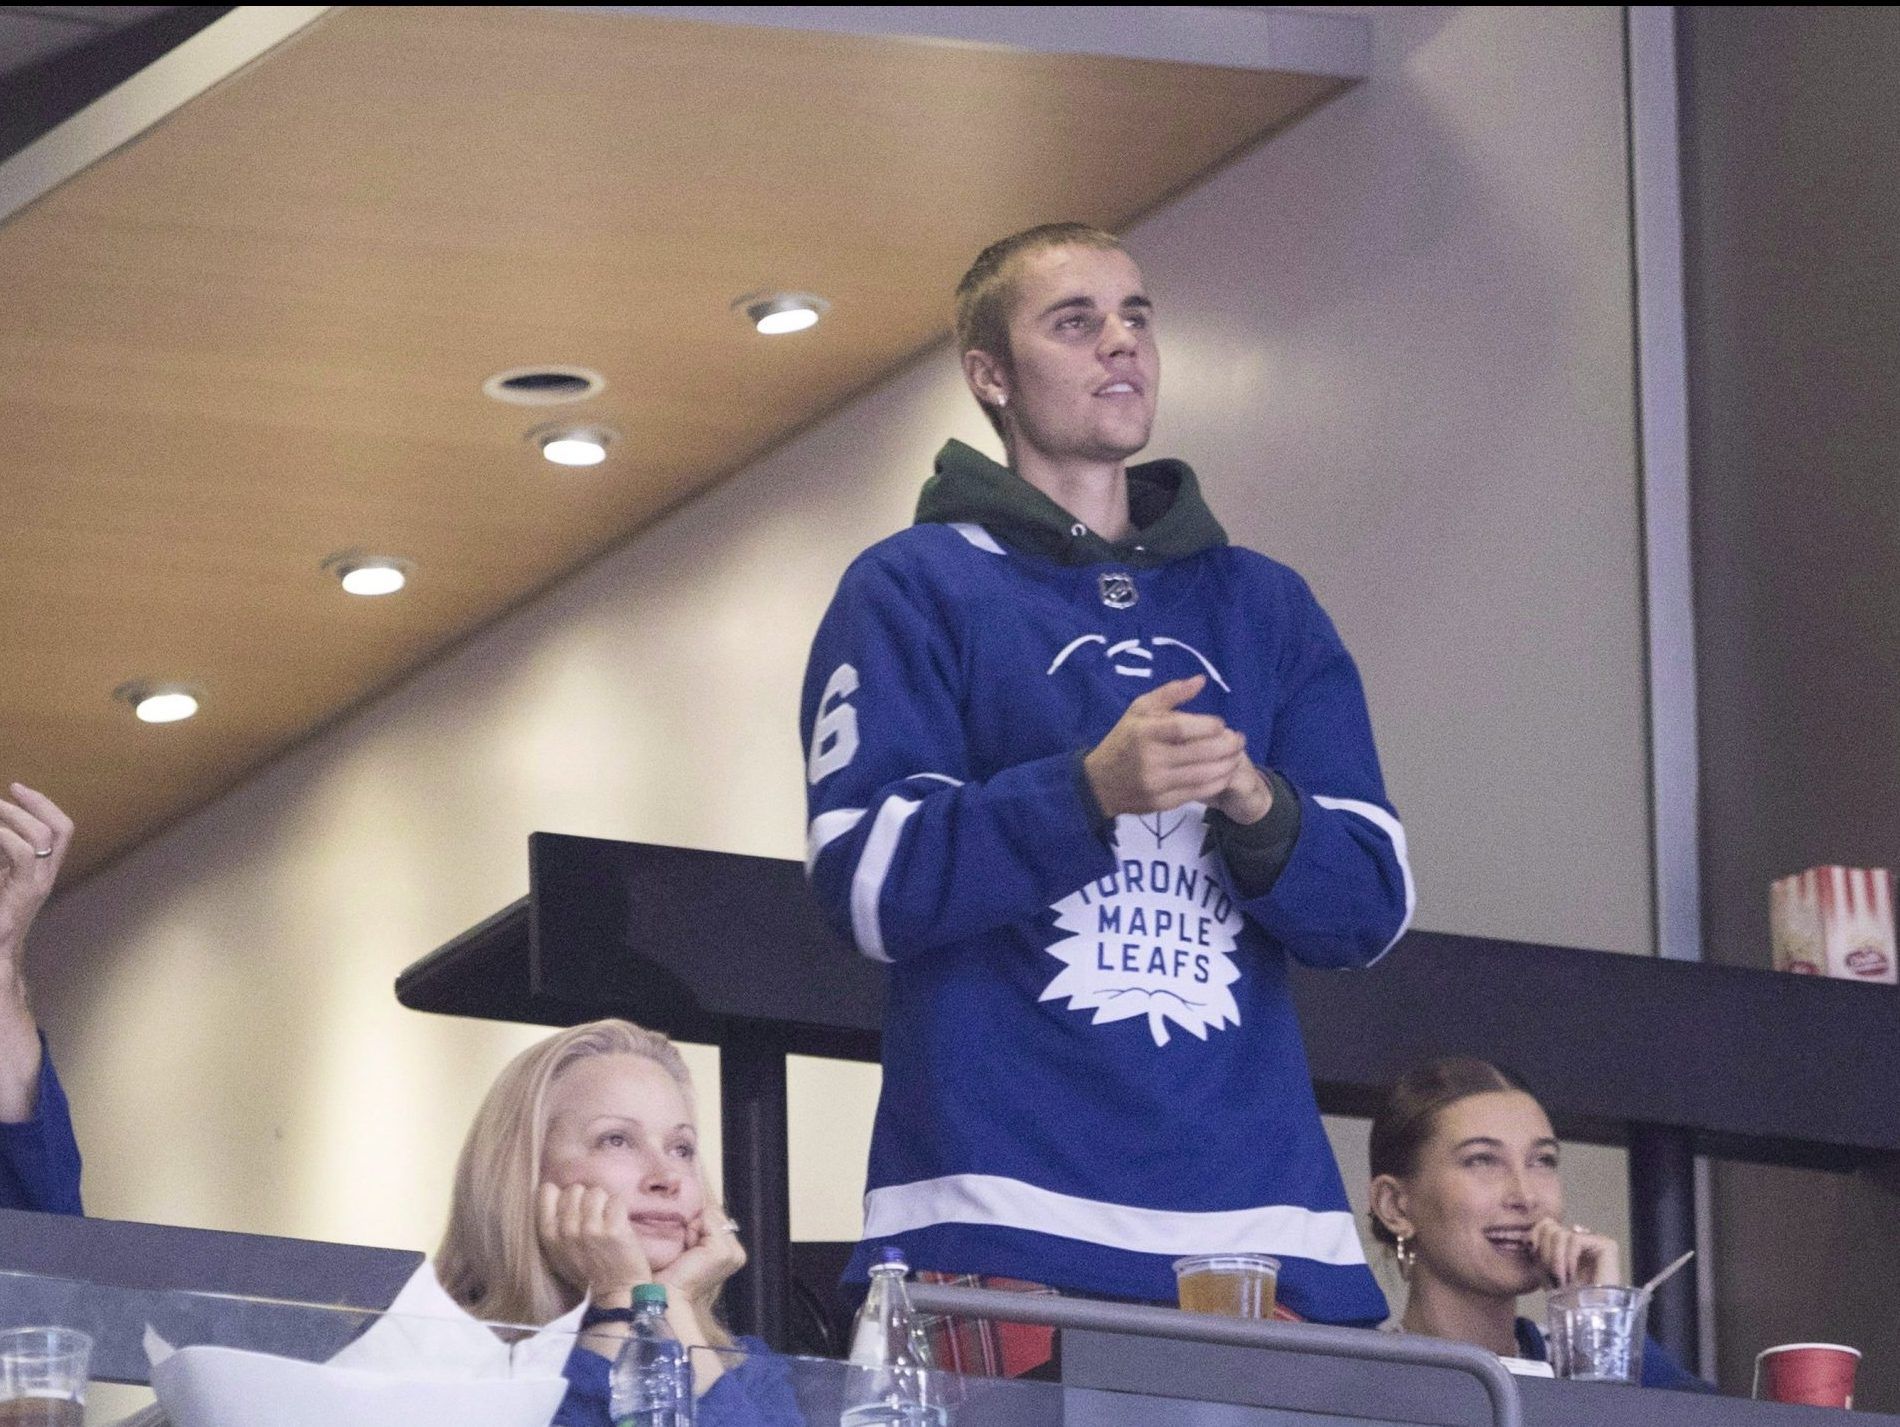 Maple Leafs team up with Justin Bieber for new reversible jersey